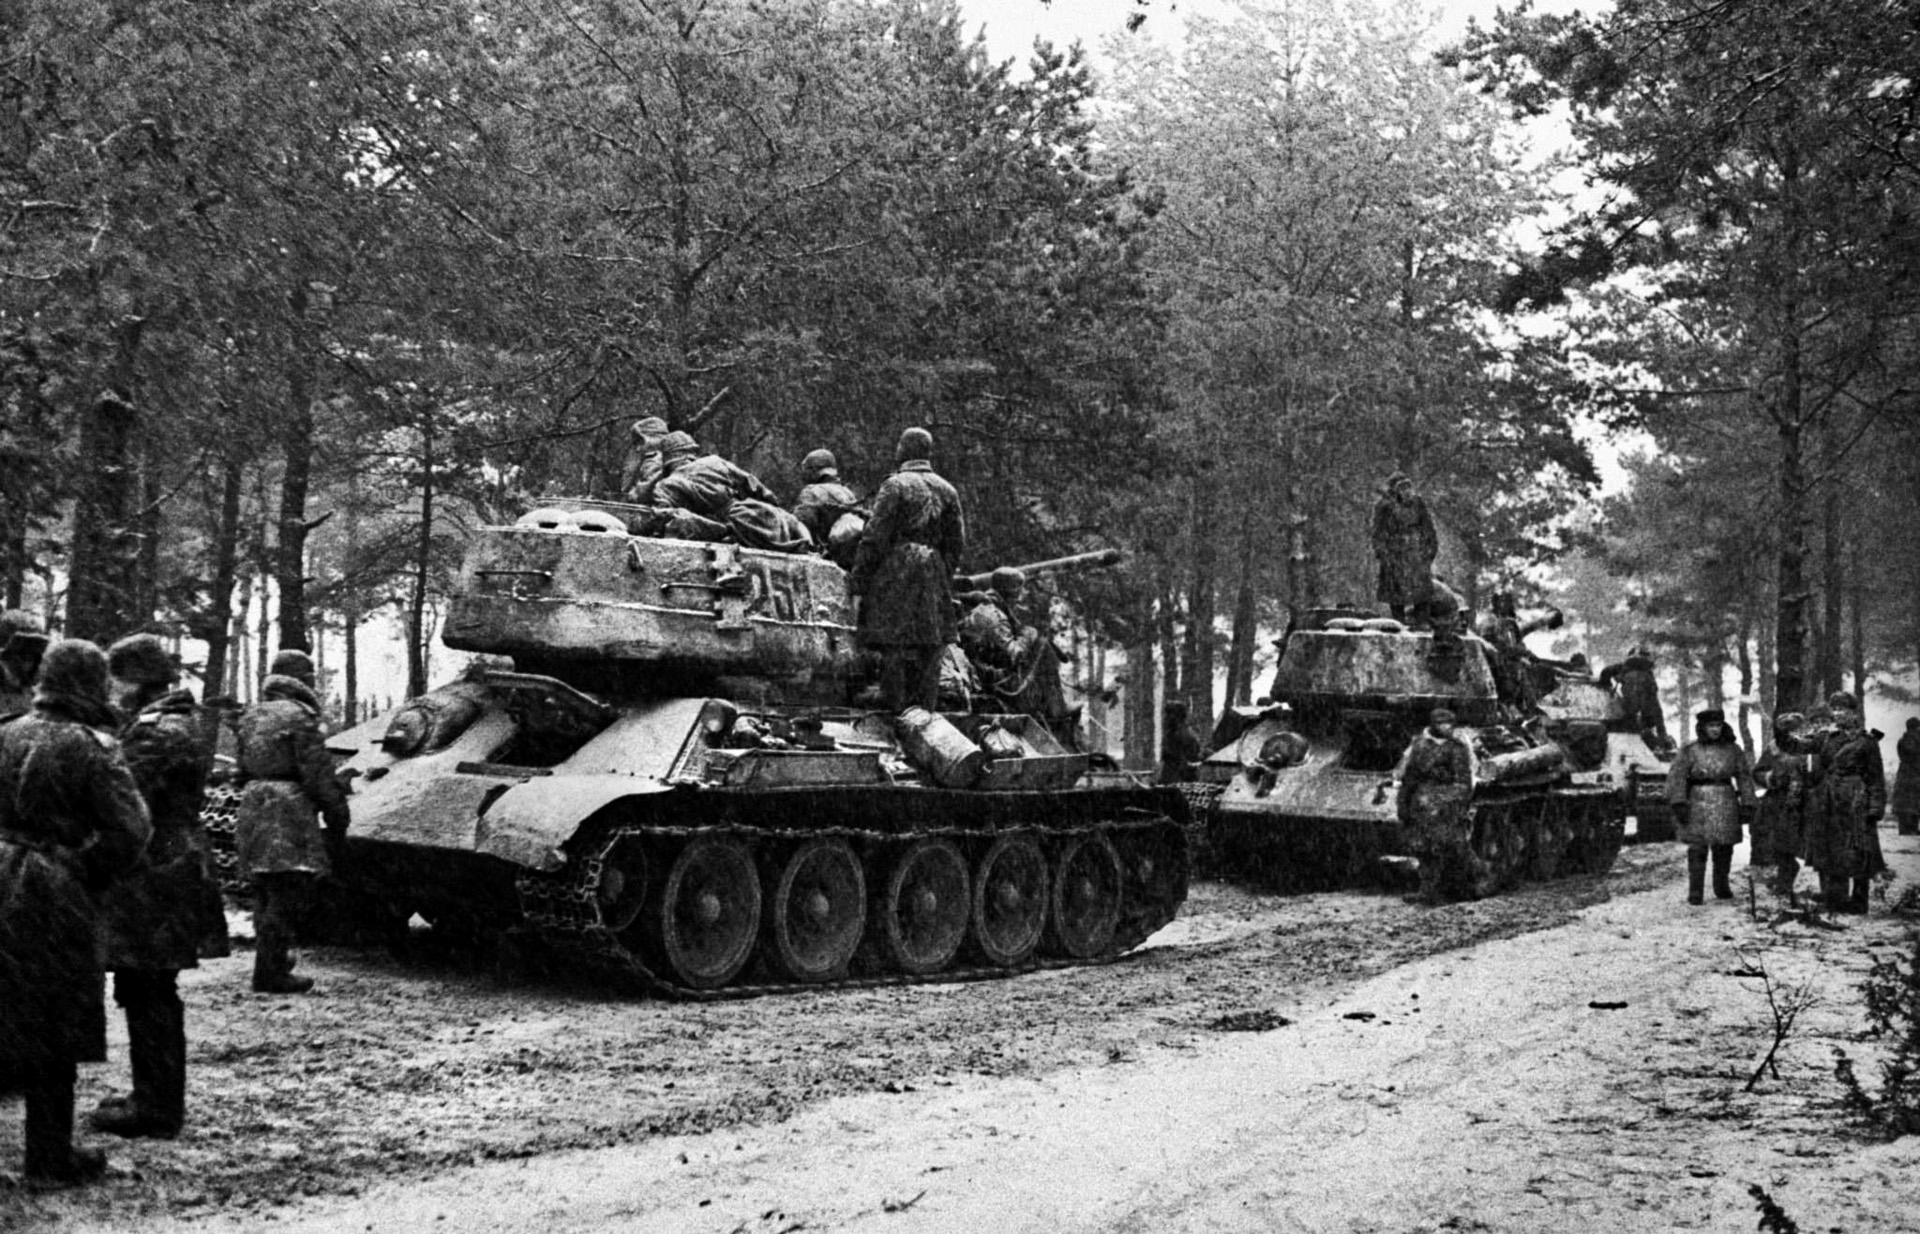 January 1945: Advancing through a wintry landscape, Red Army troops and armor approach East Prussia.